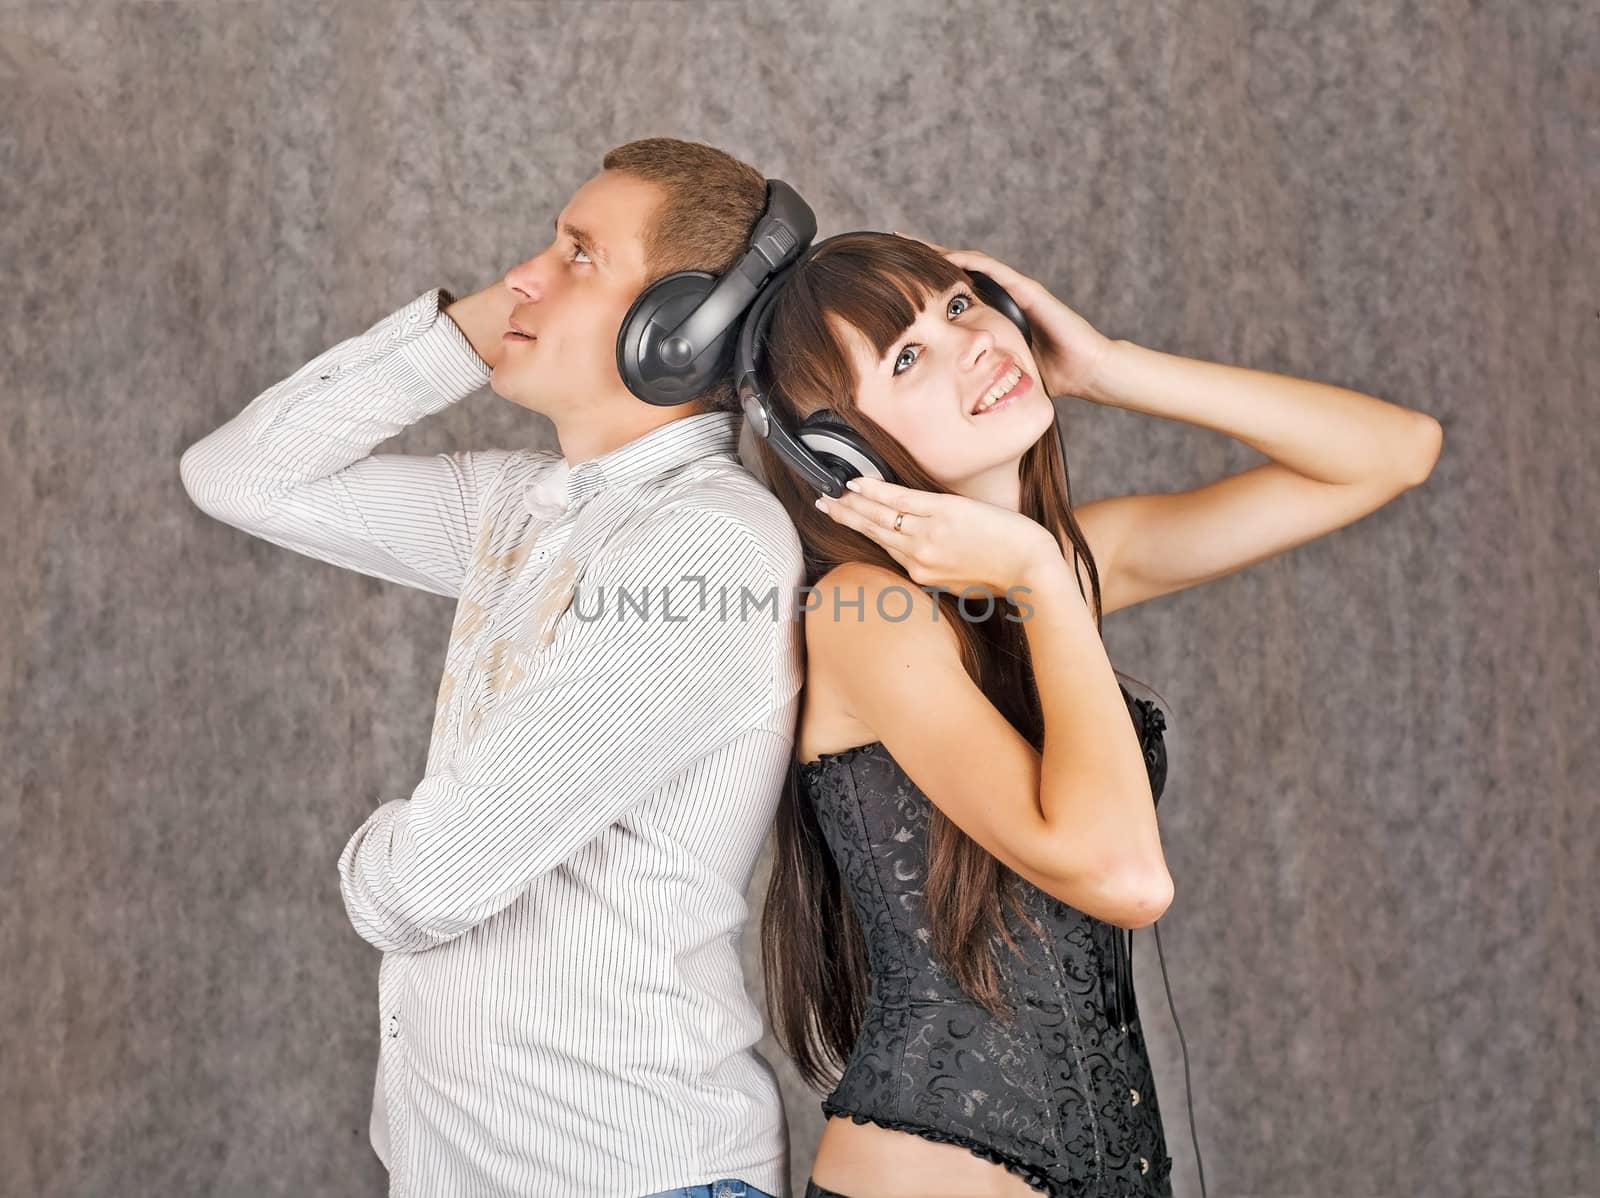 A girl and a boy, smiling happily, listening to music via headphones